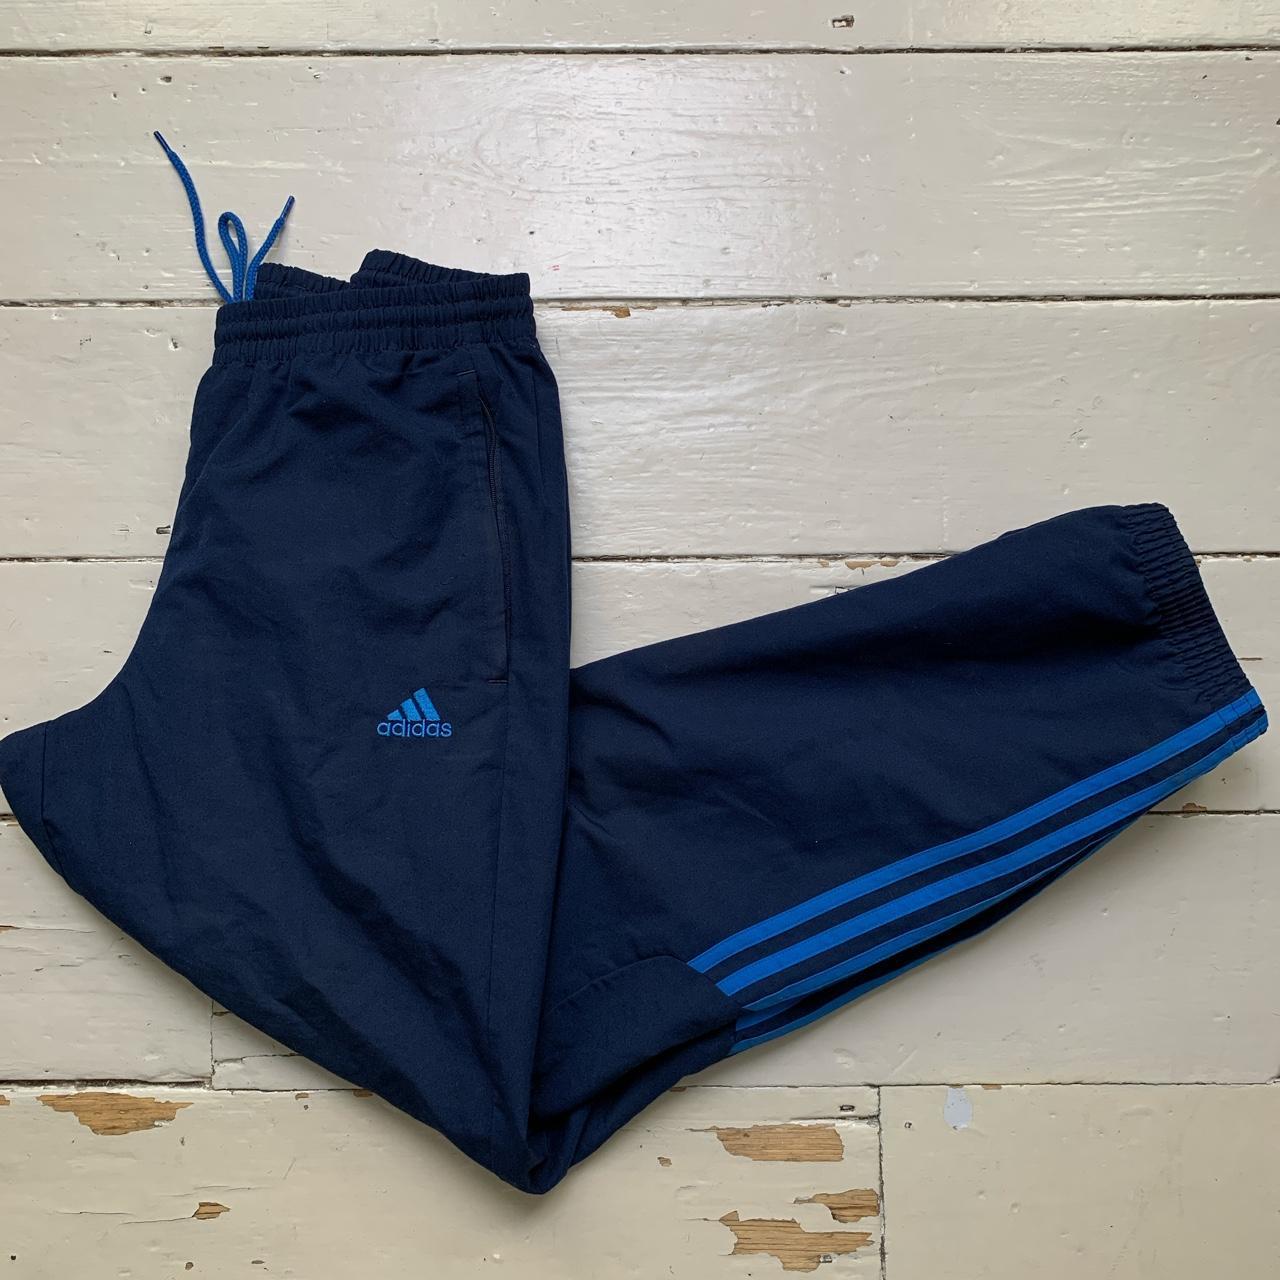 Adidas Navy and Blue Baggy Shell Bottoms